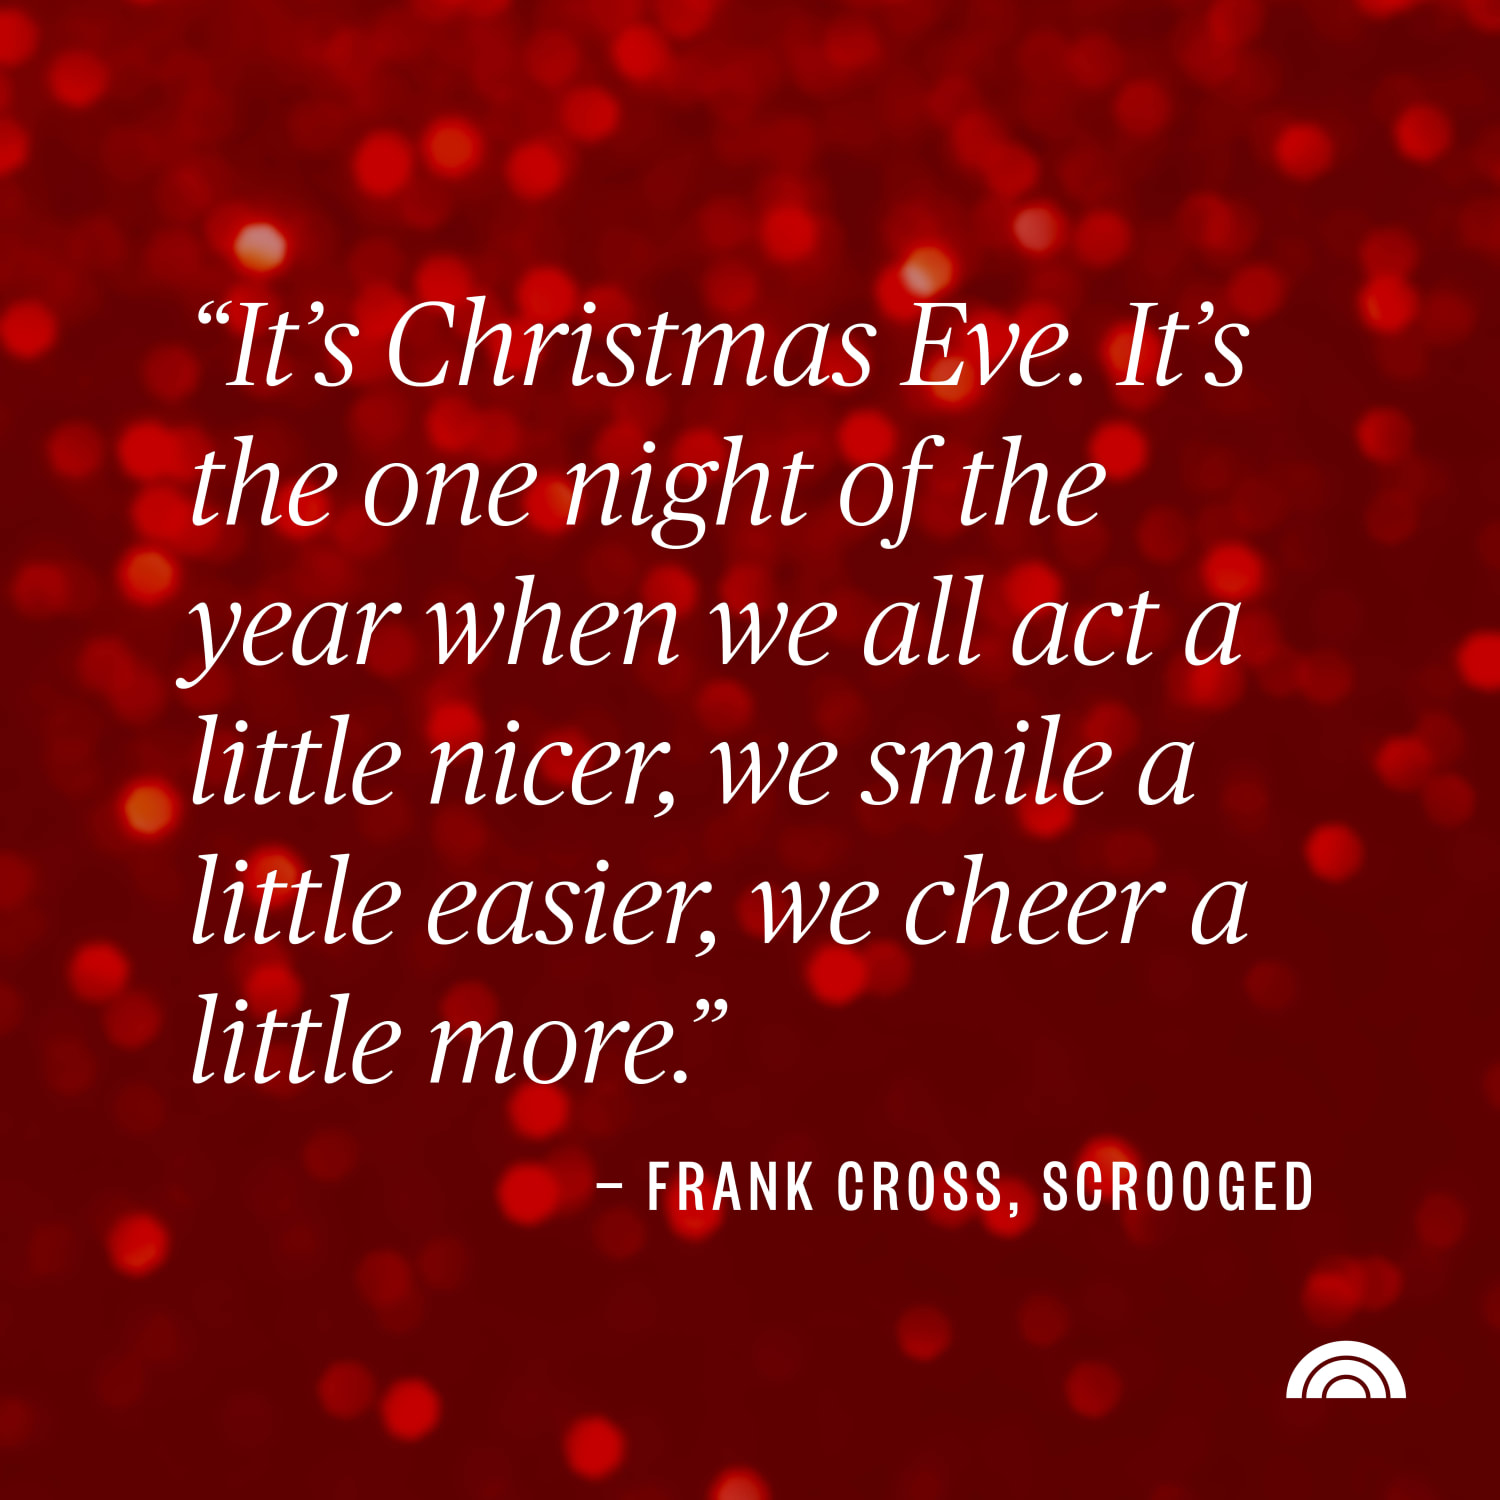 50 Best Christmas Movie Quotes: Famous, Funny Lines From Holiday Movies